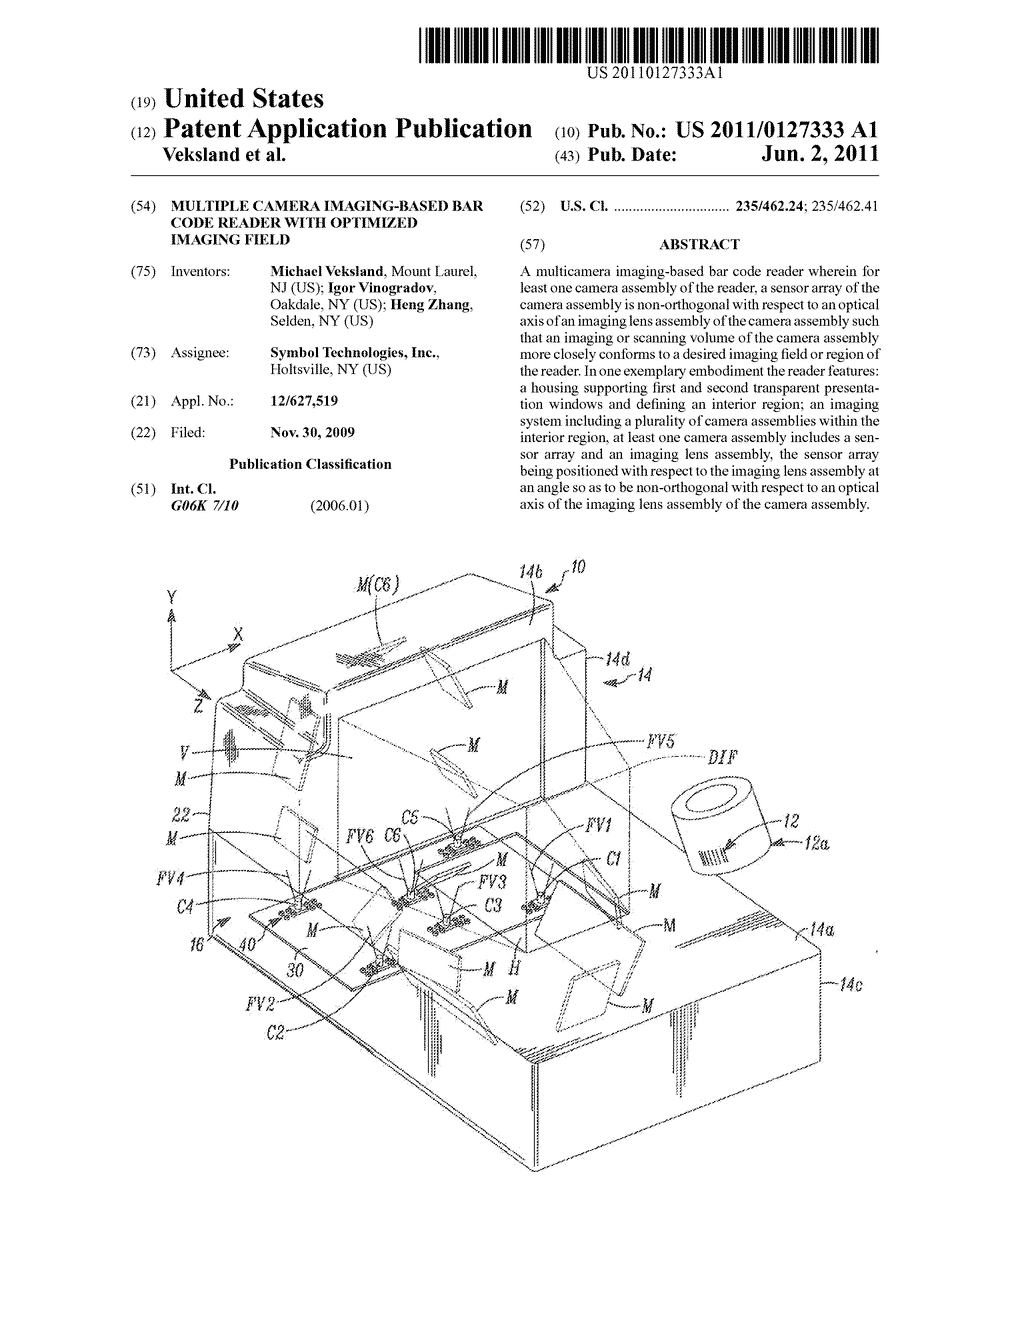 MULTIPLE CAMERA IMAGING-BASED BAR CODE READER WITH OPTIMIZED IMAGING FIELD - diagram, schematic, and image 01